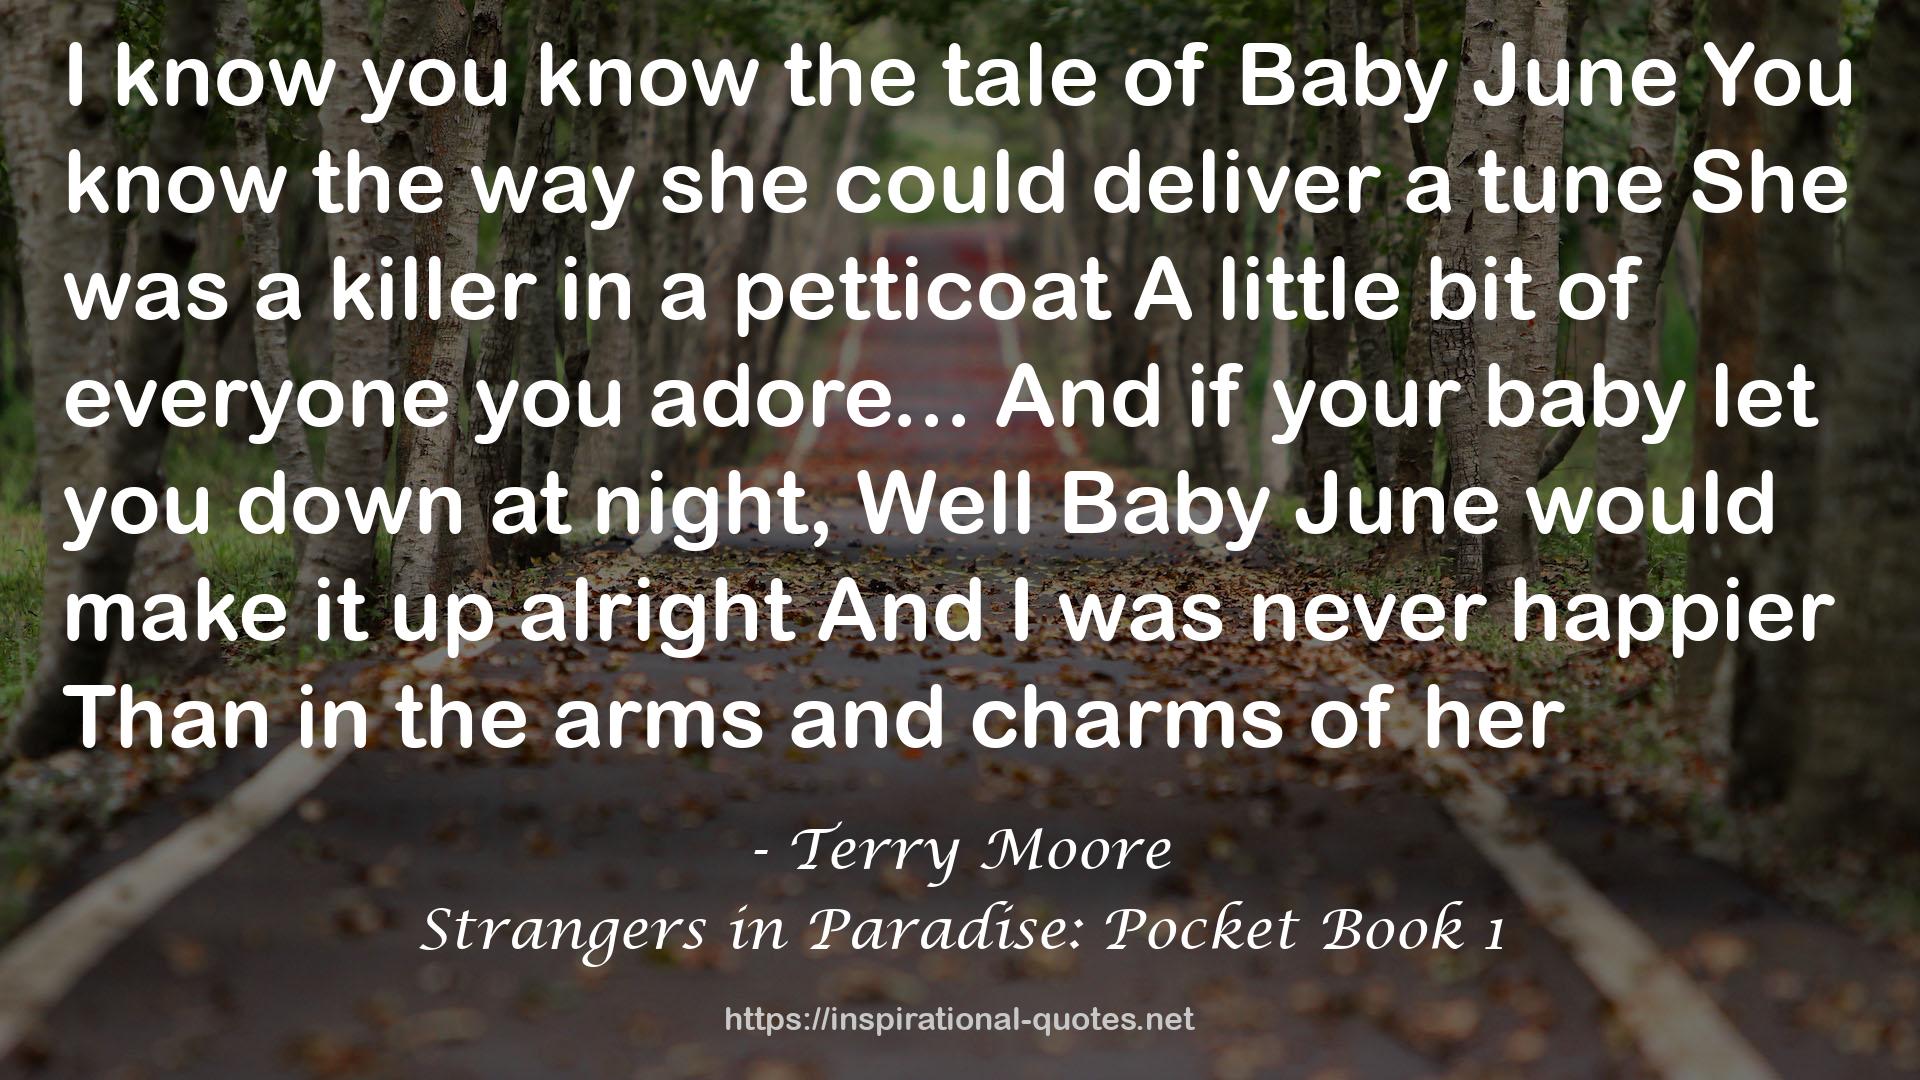 Strangers in Paradise: Pocket Book 1 QUOTES